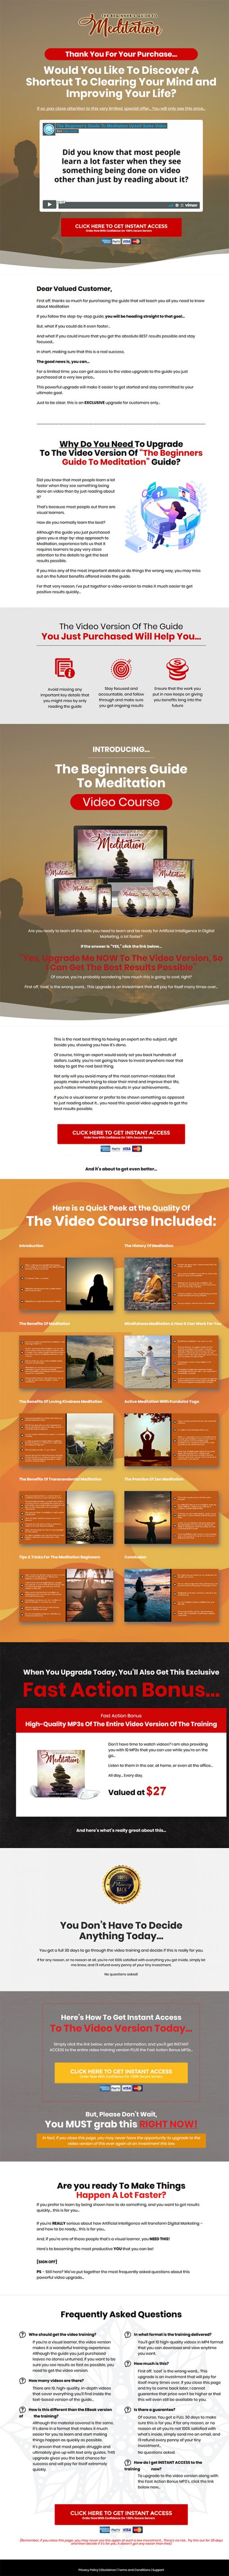 Beginner's Guide to Meditation Ebook and Videos MRR